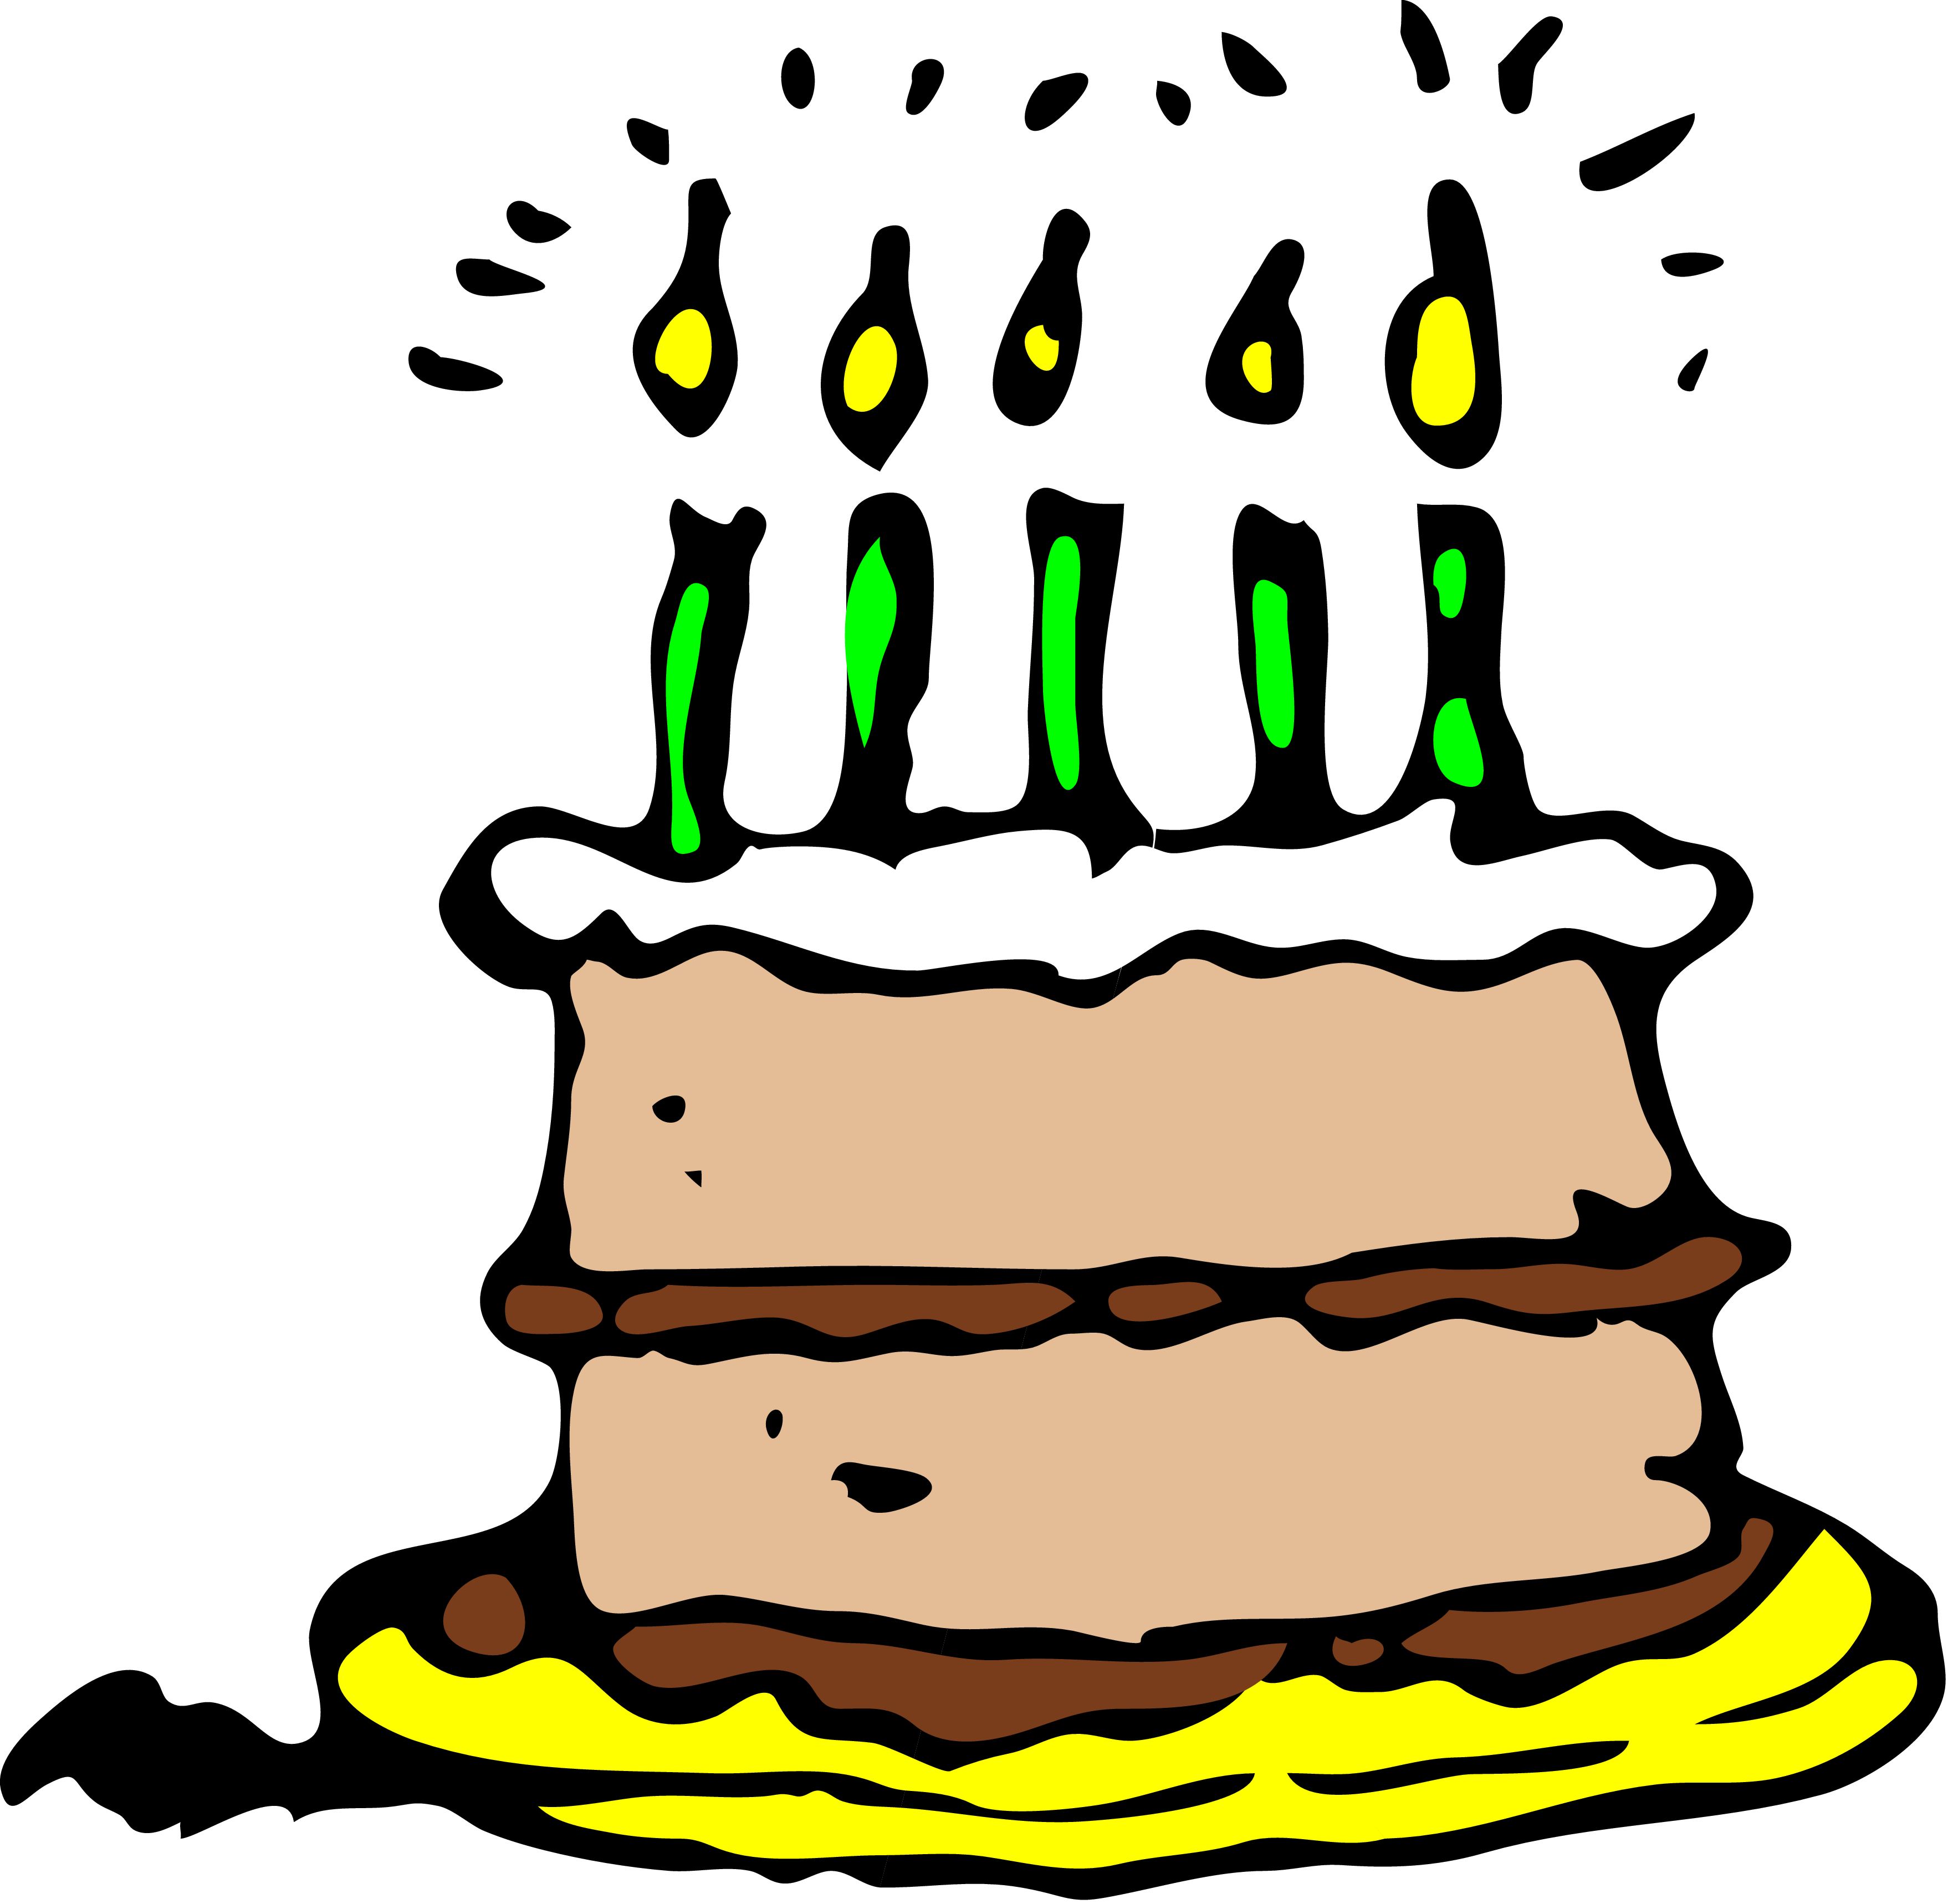 Birthday Cake With Candles Clipart - ClipArt Best